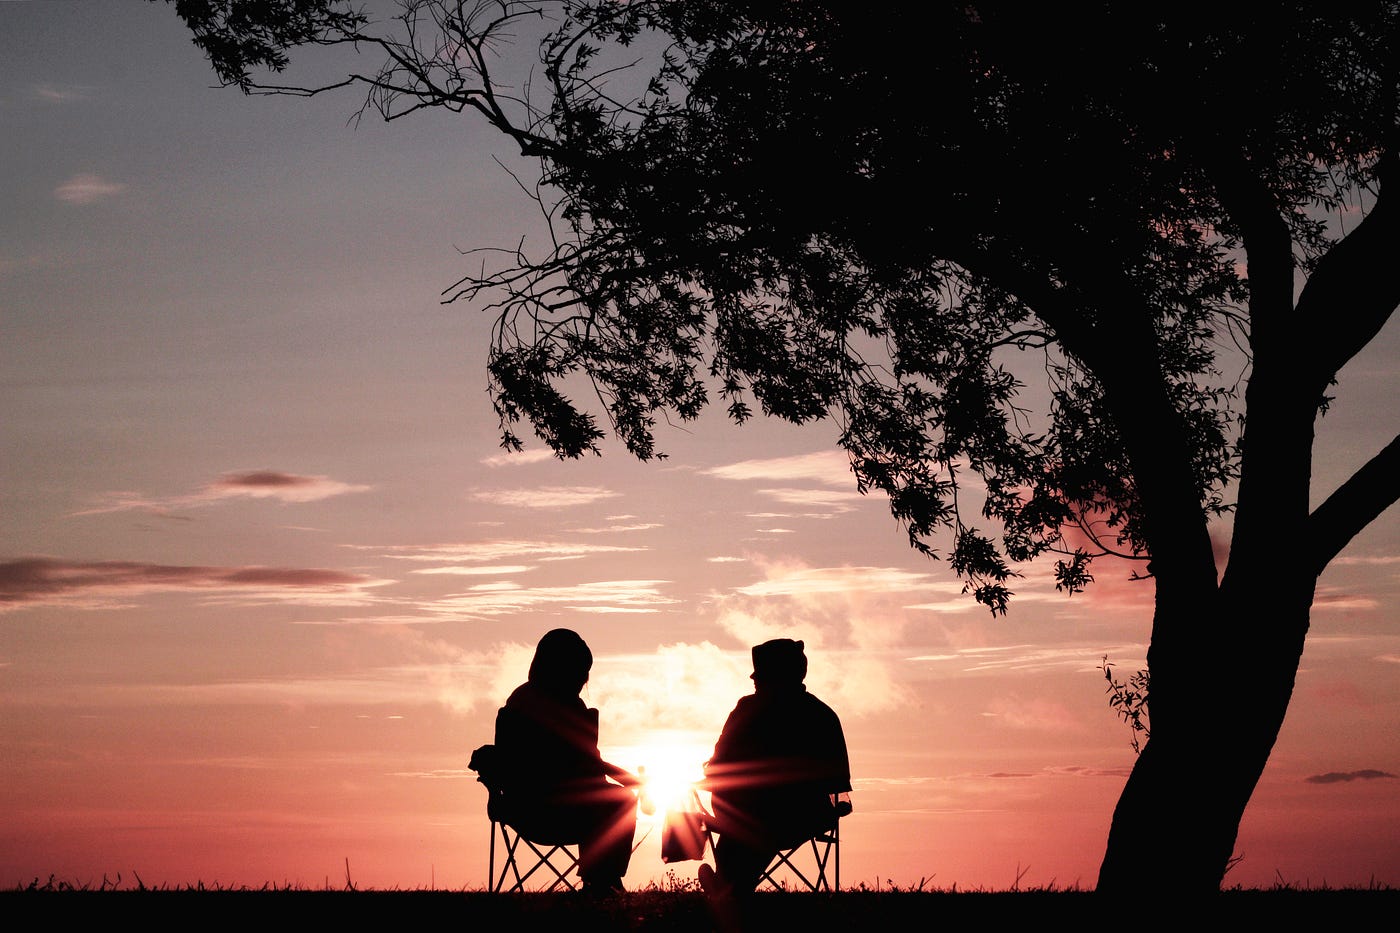 An elderly couple sits in lawn chairs under a tree, facing away from the camera. The sun sets in the background.